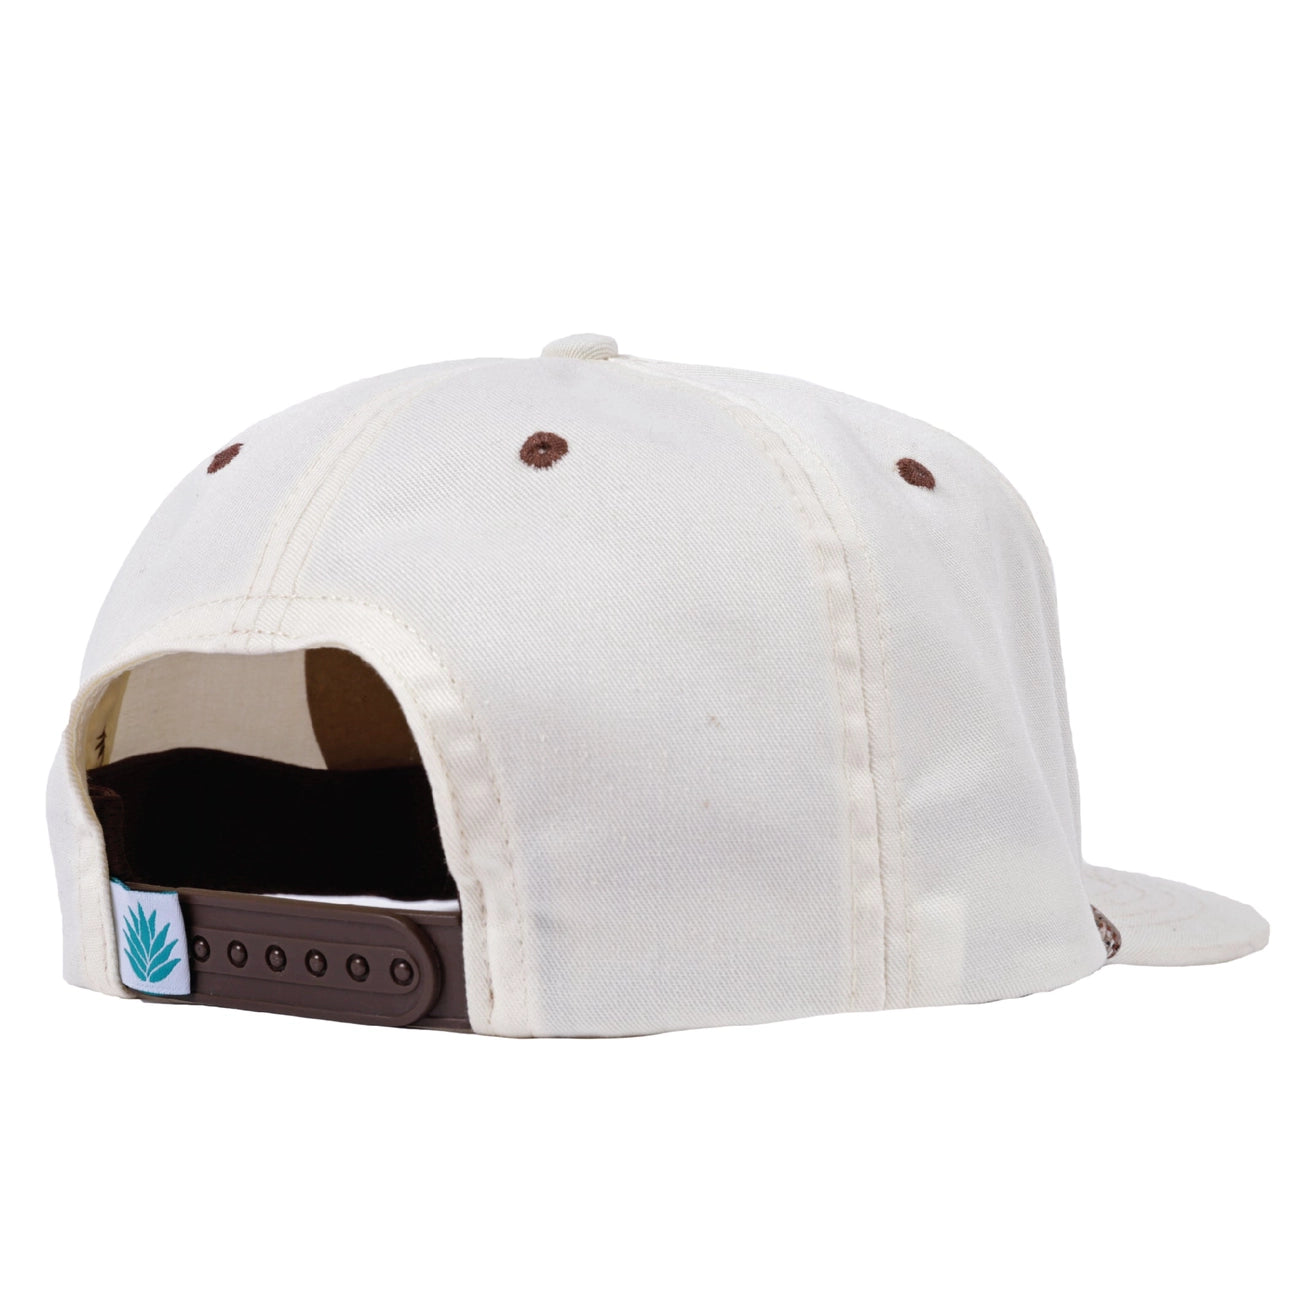 The Western Show 6 Panel Snapback Hat